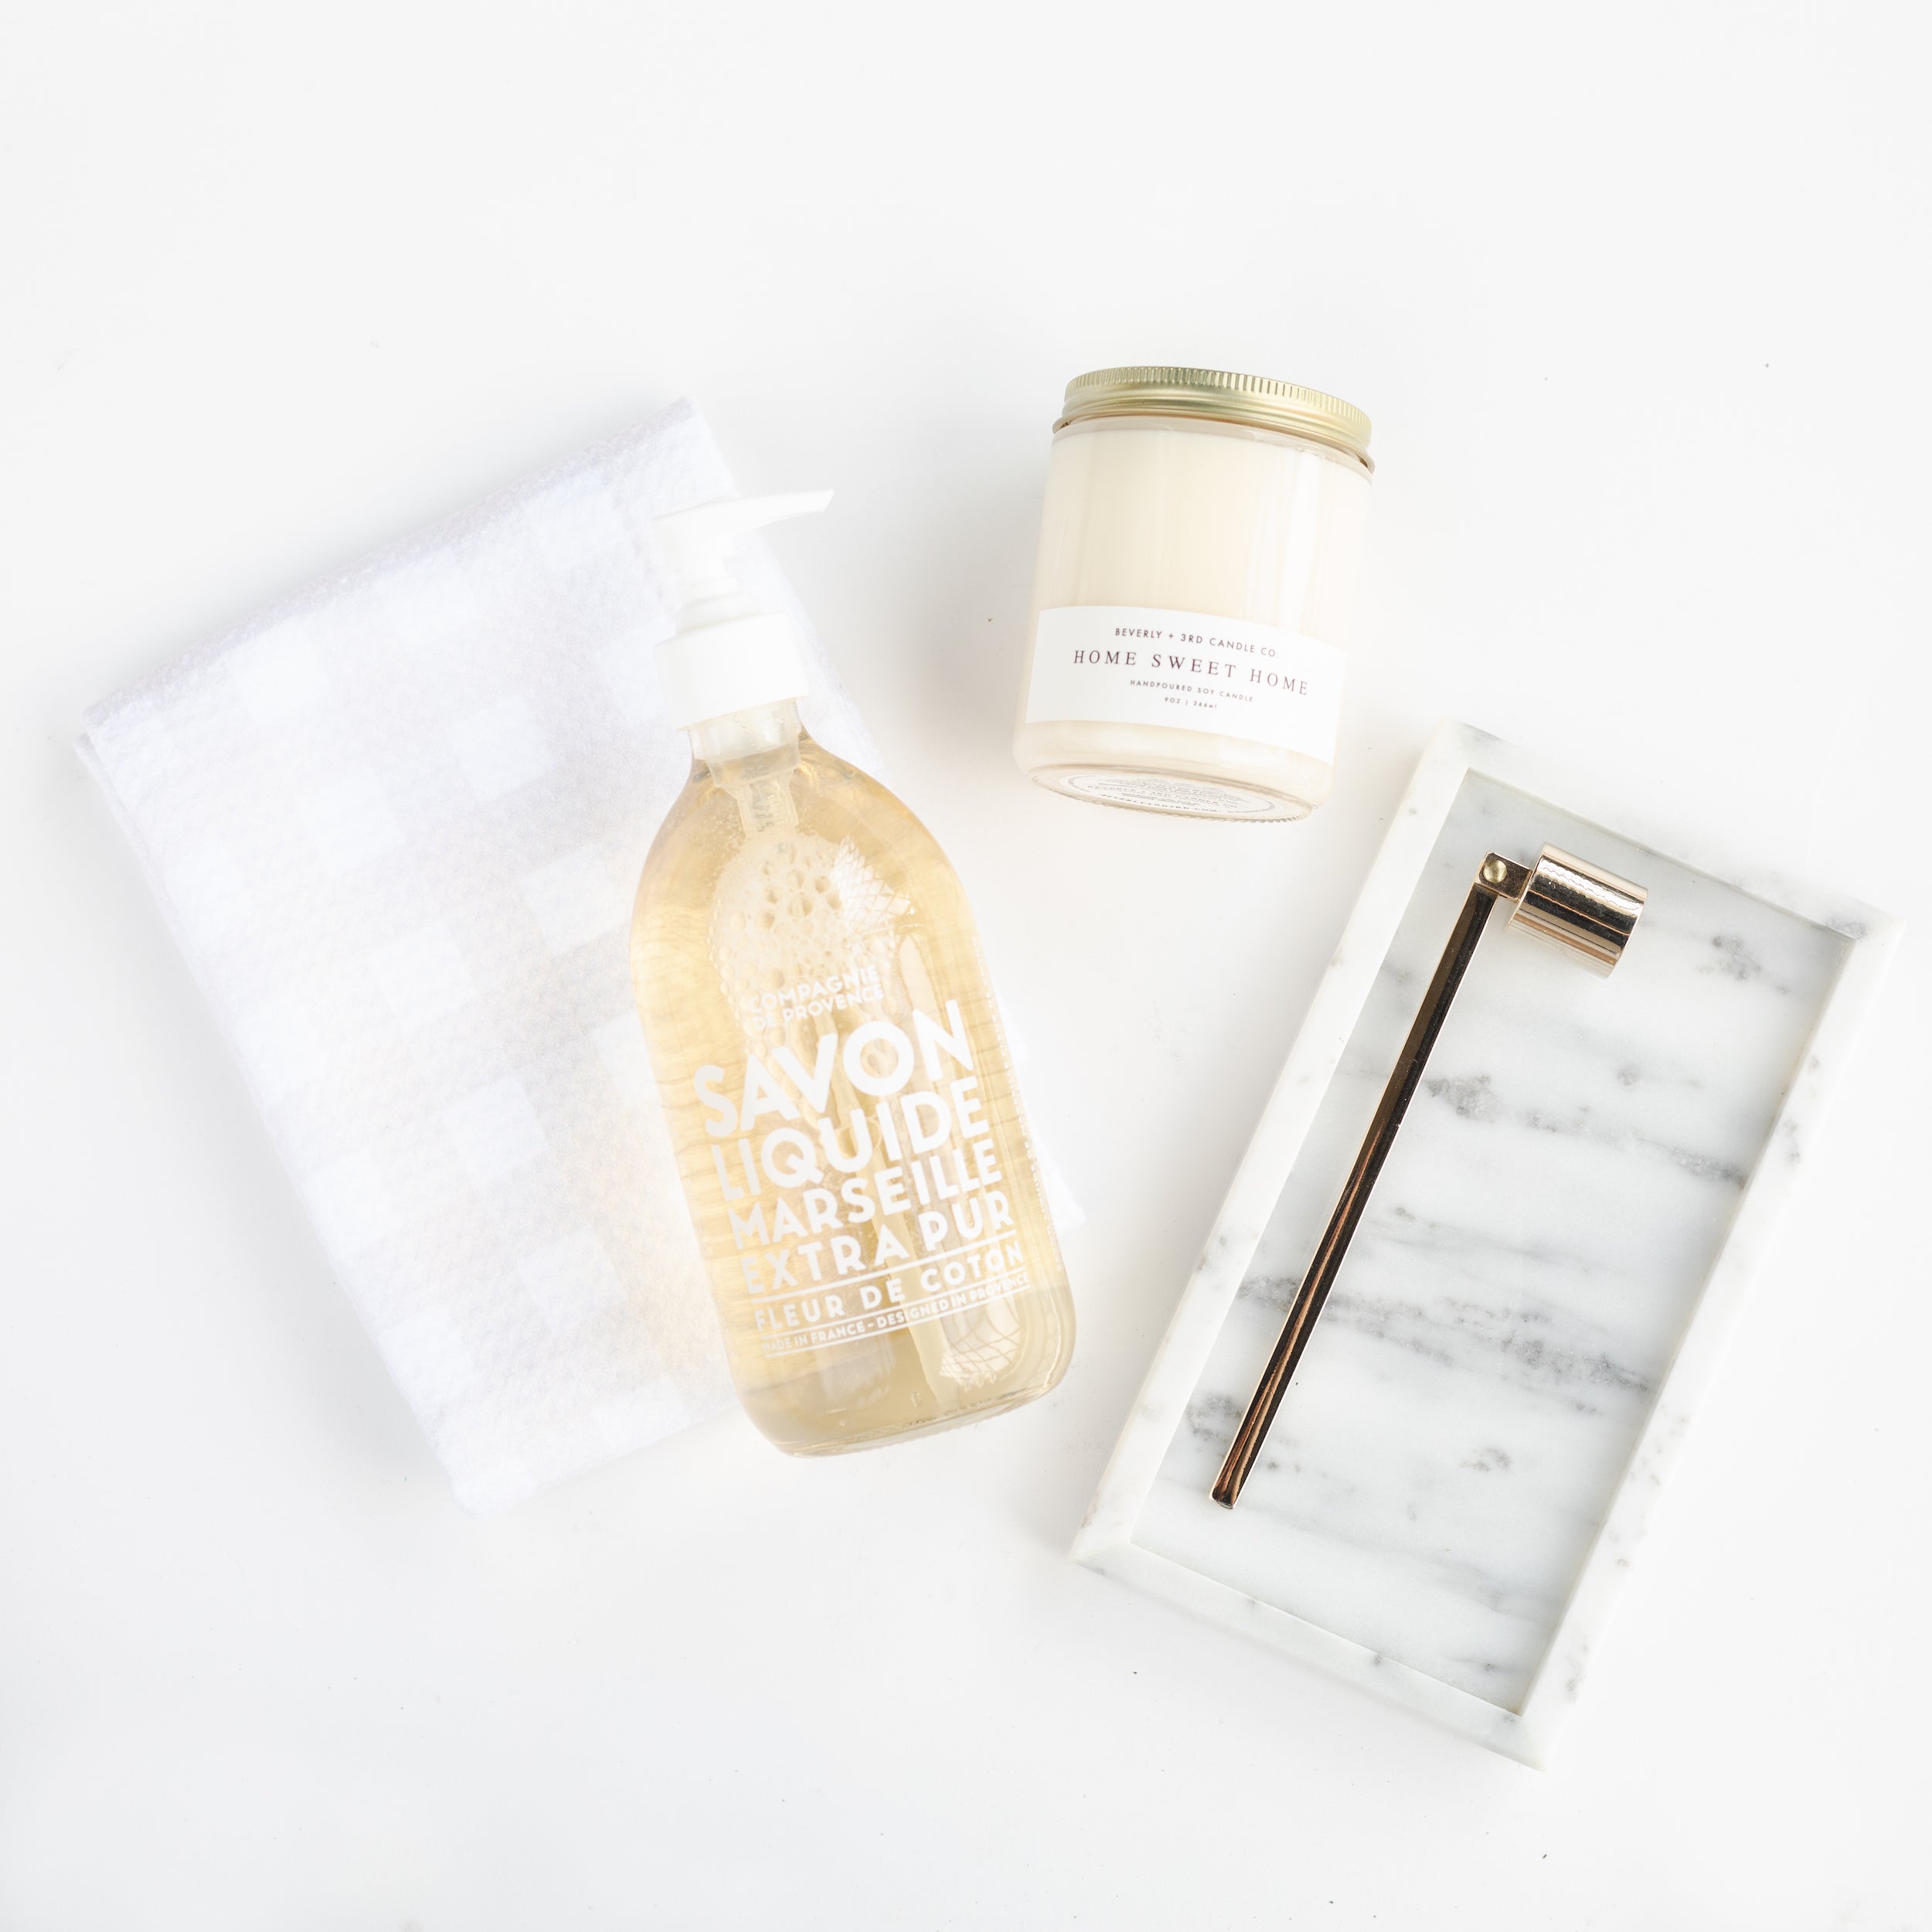 Geometry Linen Plaid Tea Towel, Mielle Marble Tray, Vivie Gold Candle Snuffer, Beverly + 3rd Home Sweet Home Candle, and Compagnie de Provence 16.7 oz Liquid Hand Soap laid out on white background.